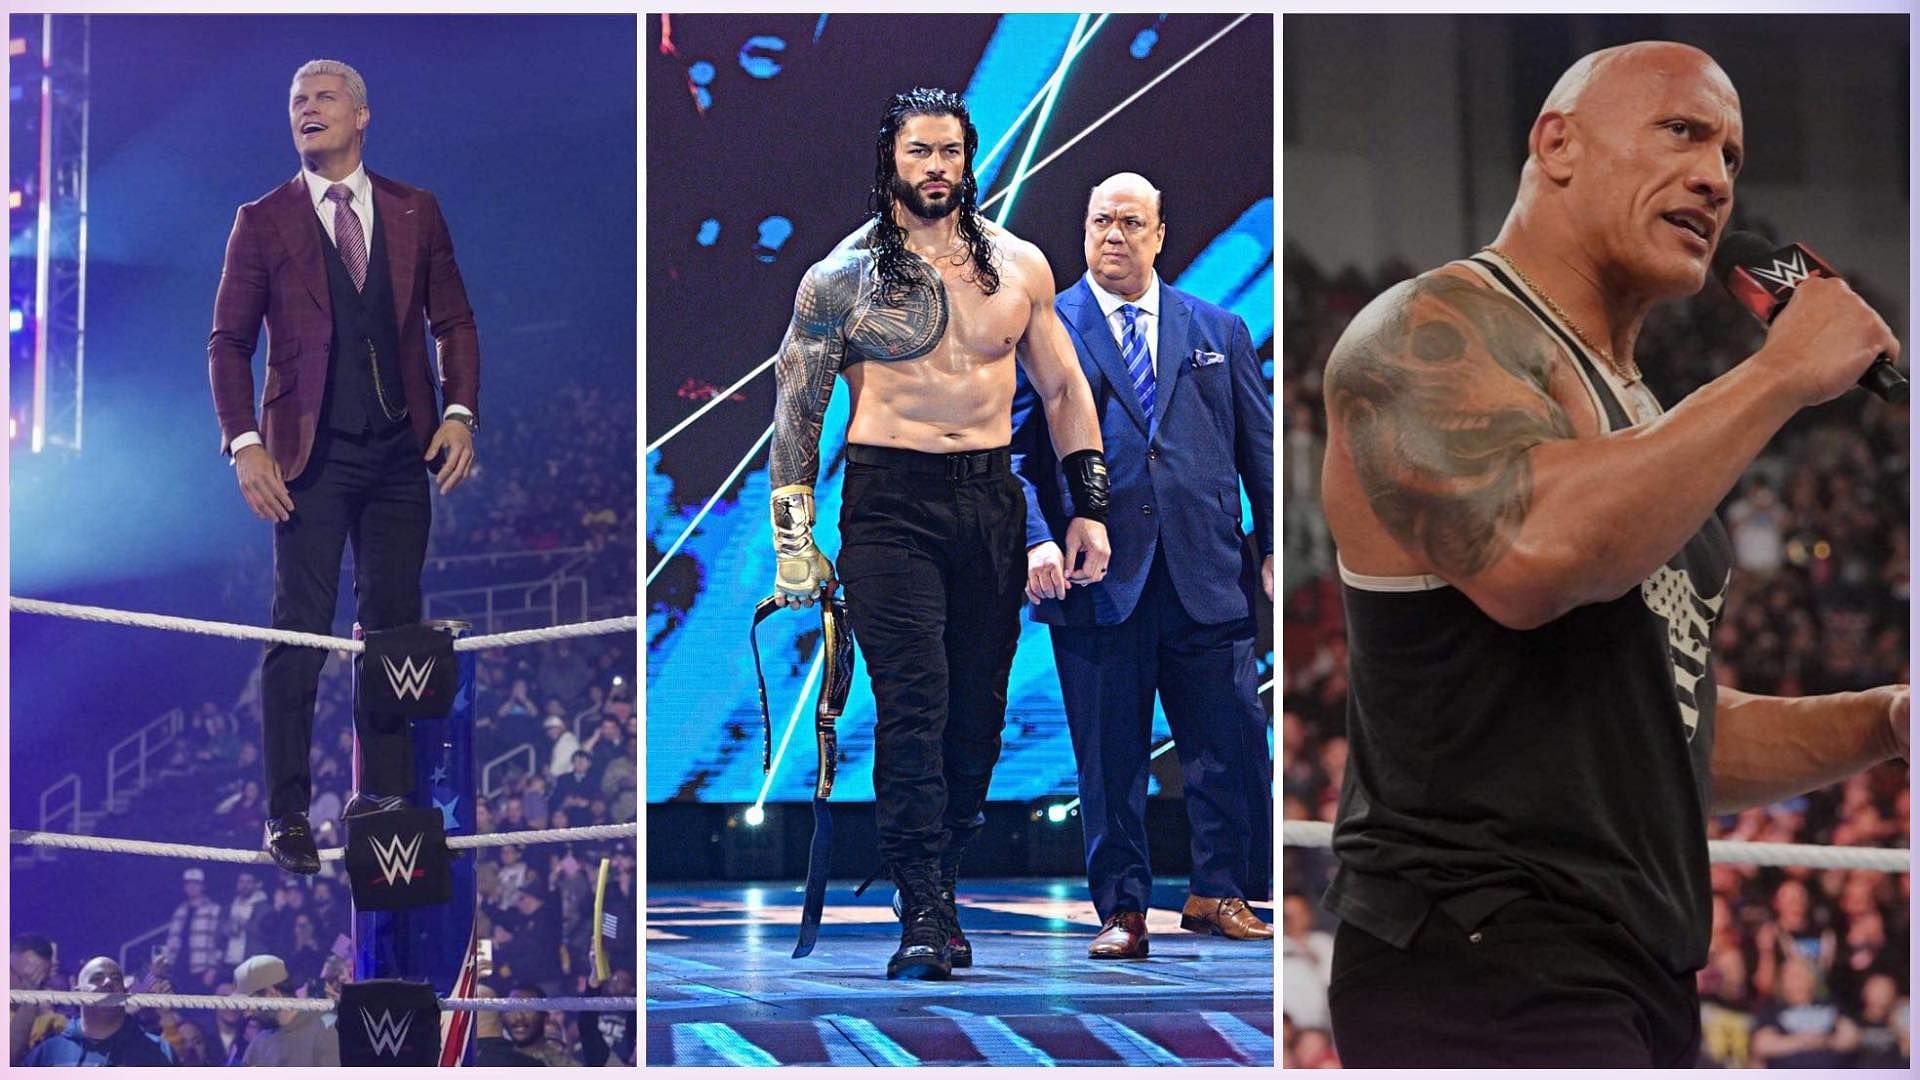 Cody Rhodes, The Rock, and Roman Reigns have an ongoing story in WWE